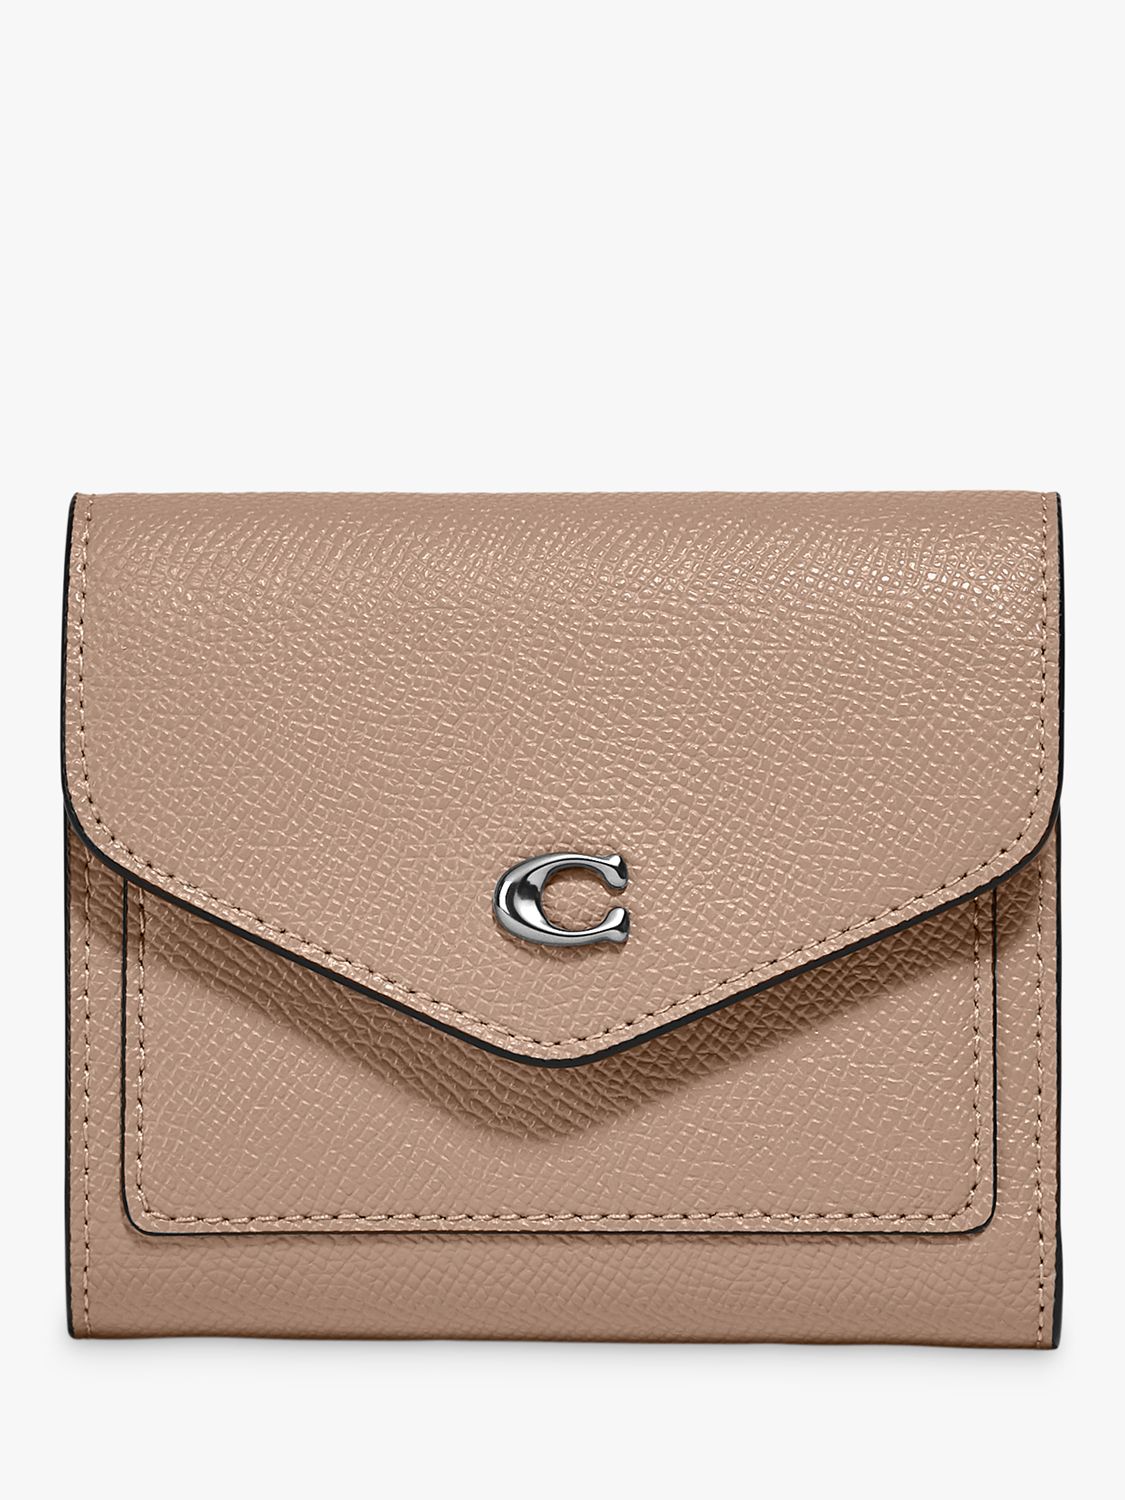 Coach Wyn Small Leather Envelope Purse, Taupe at John Lewis & Partners